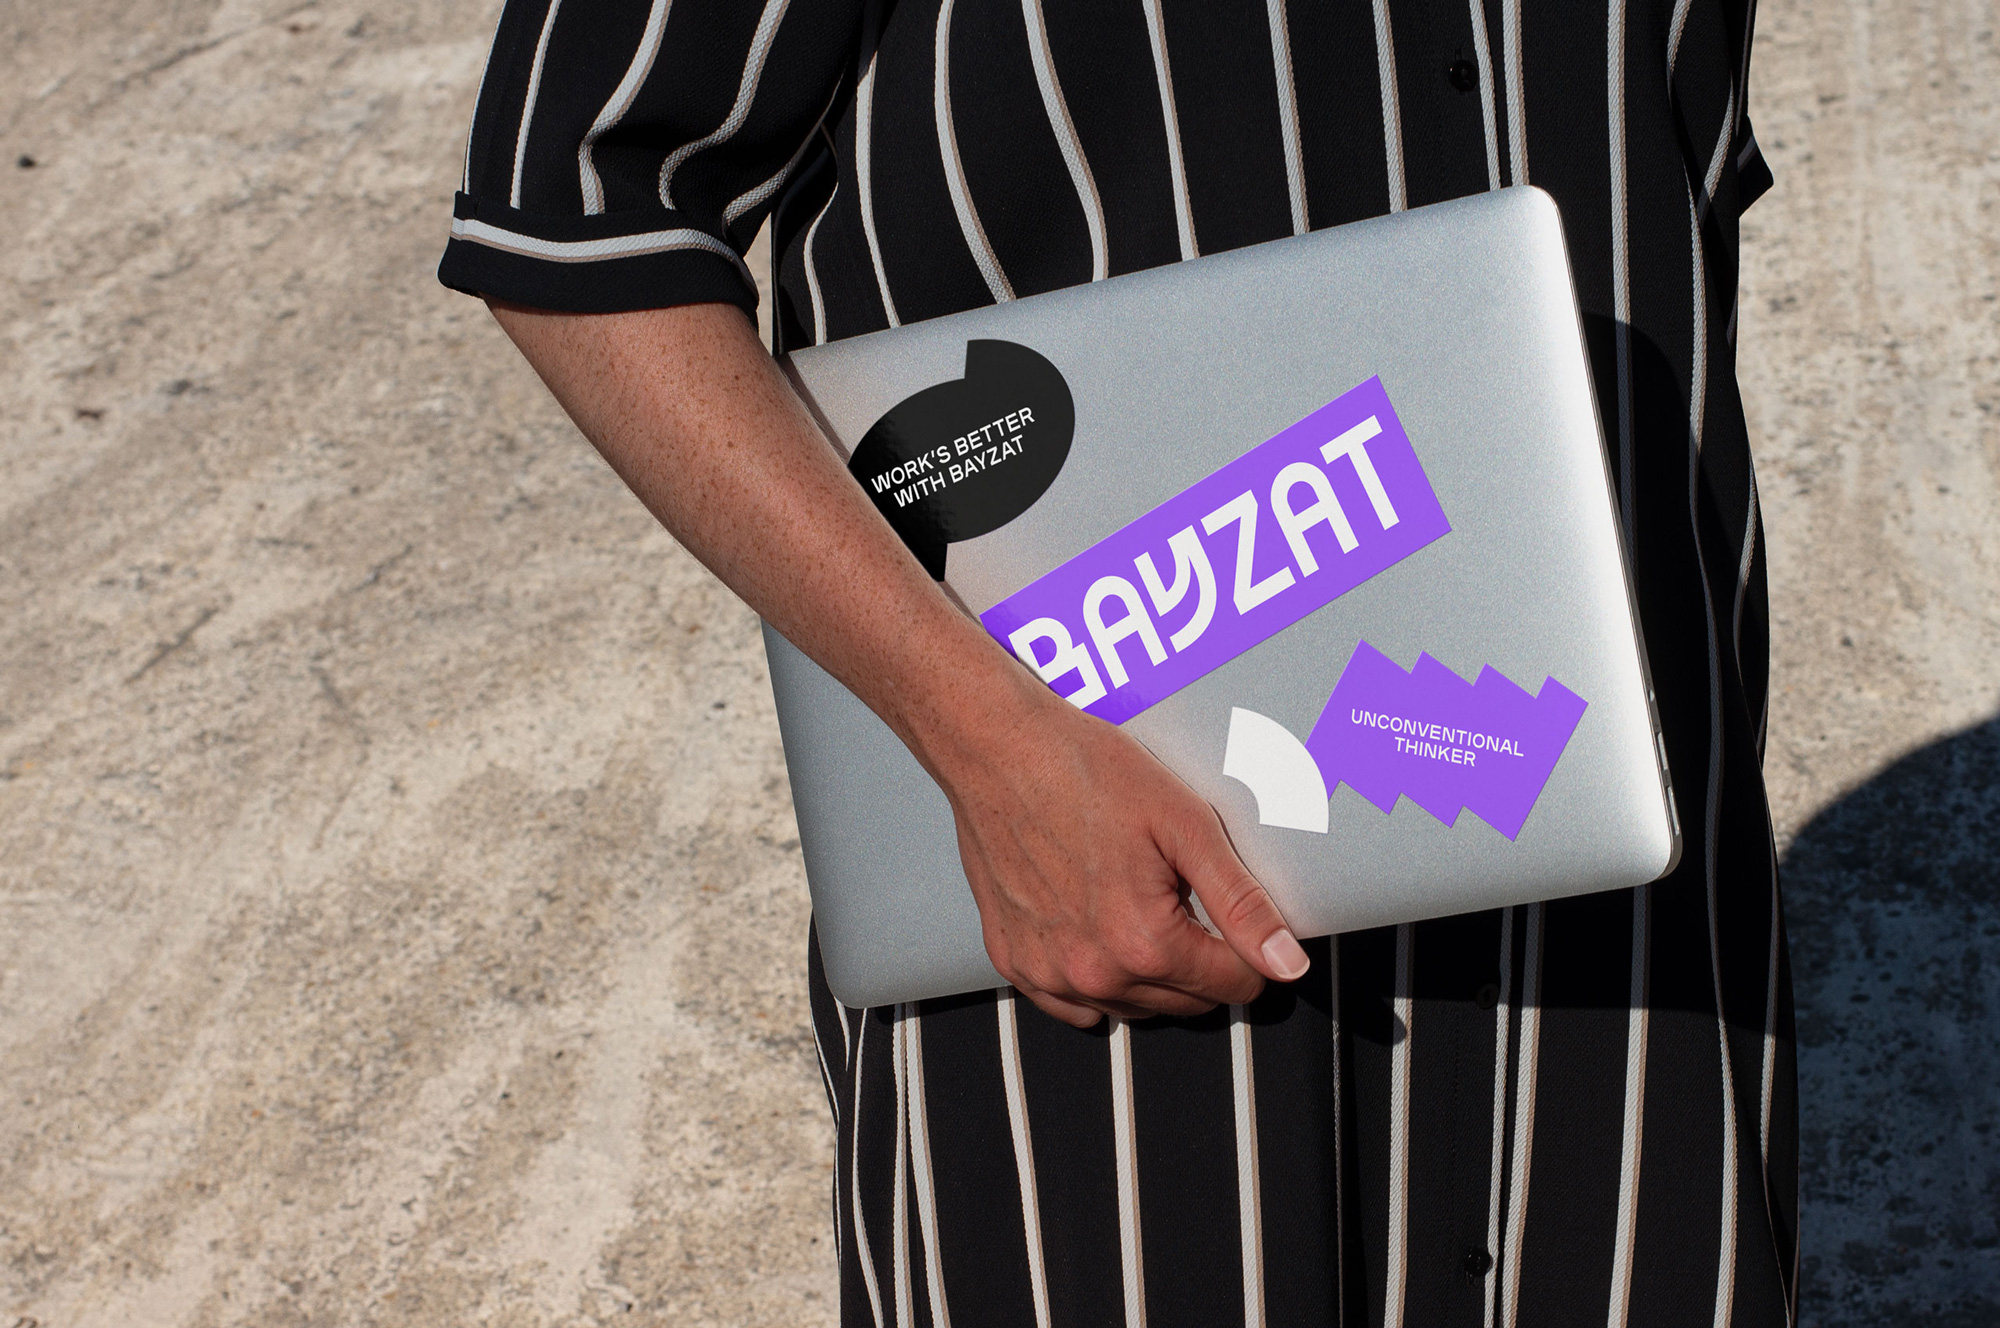 New Logo and Identity for Bayzat by Ragged Edge